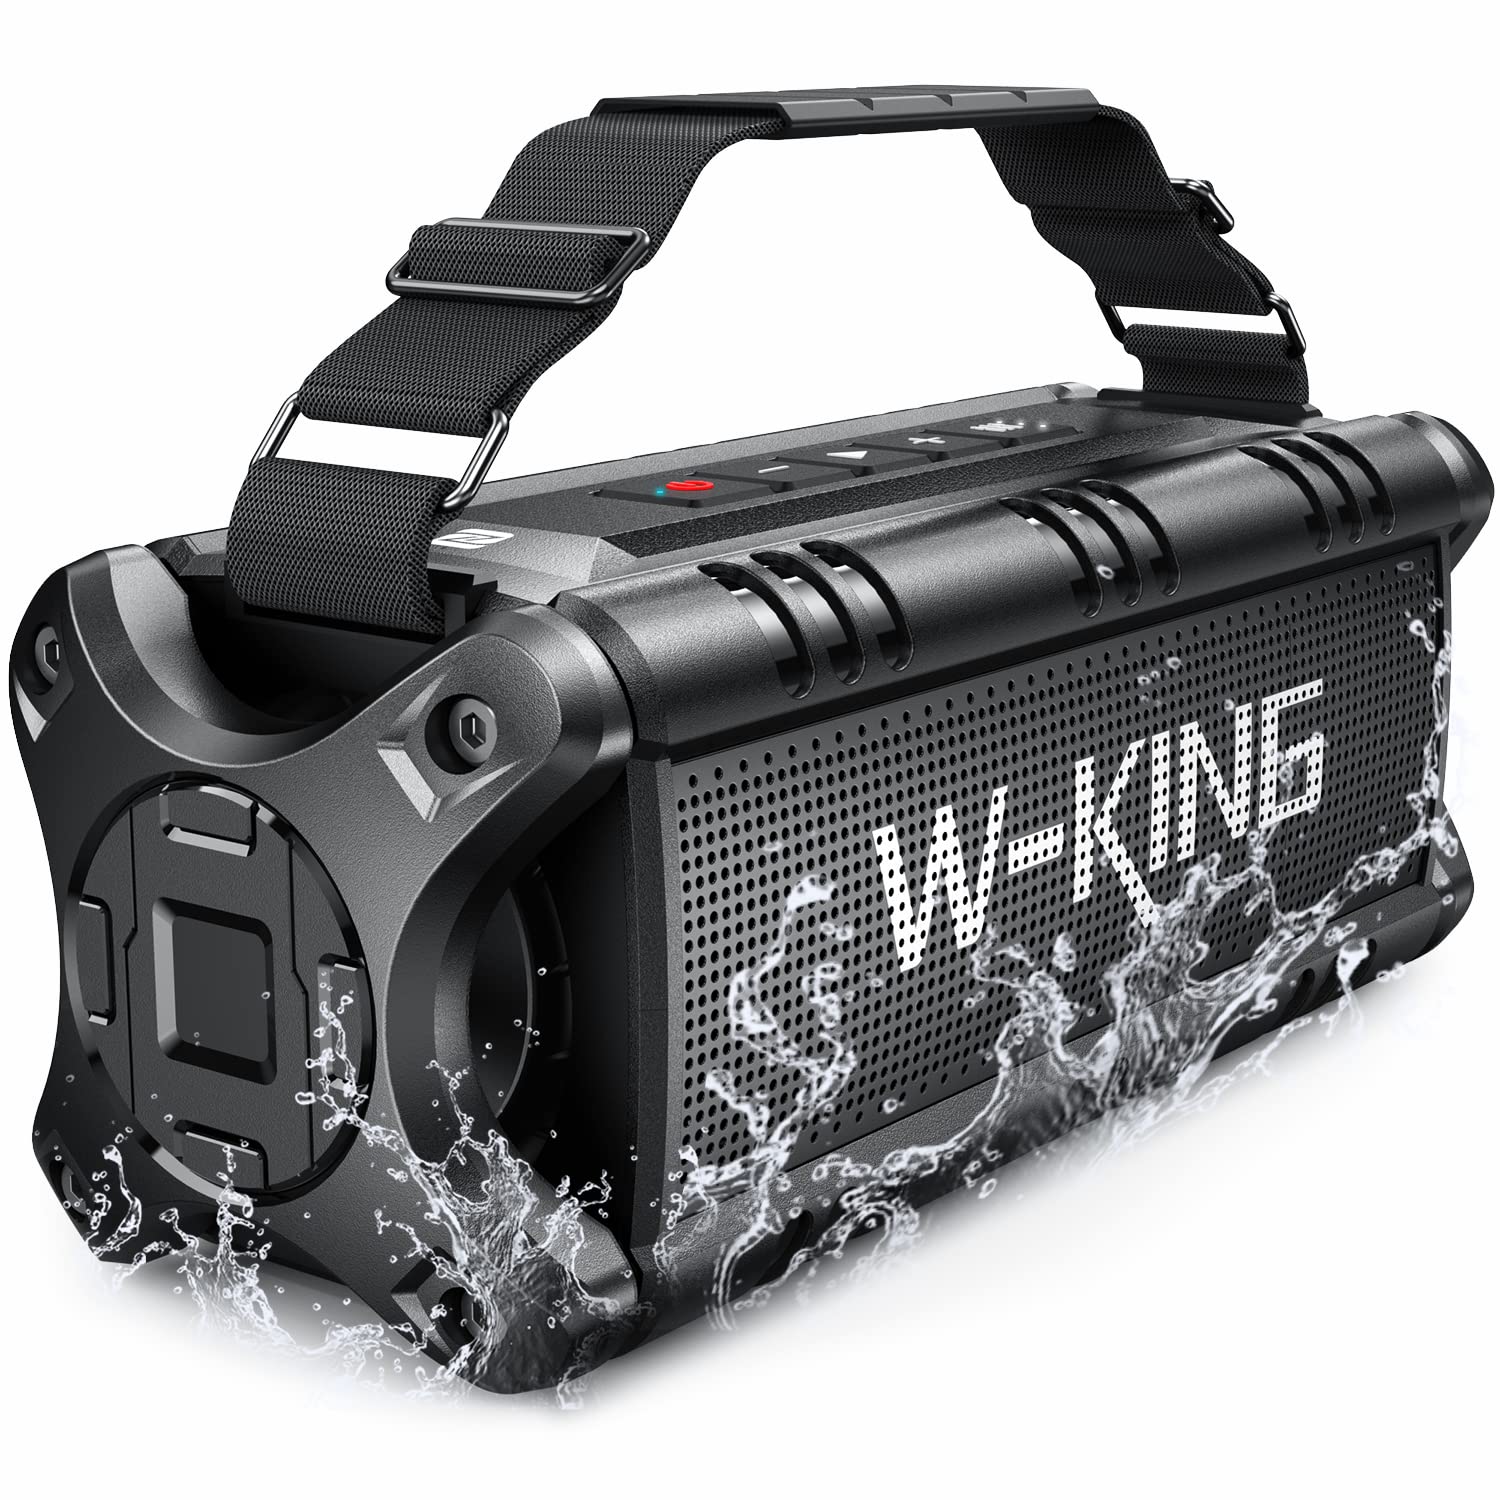 Bluetooth Speaker, W-KING 50W Speakers Wireless Bluetooth 5.0 With Deep Bass, IPX6 Waterproof Loud Bluetooth Speaker With 24H Playback/Two Portable Speakers Pairing/TF Card/EQ/NFC for Outdoor Party